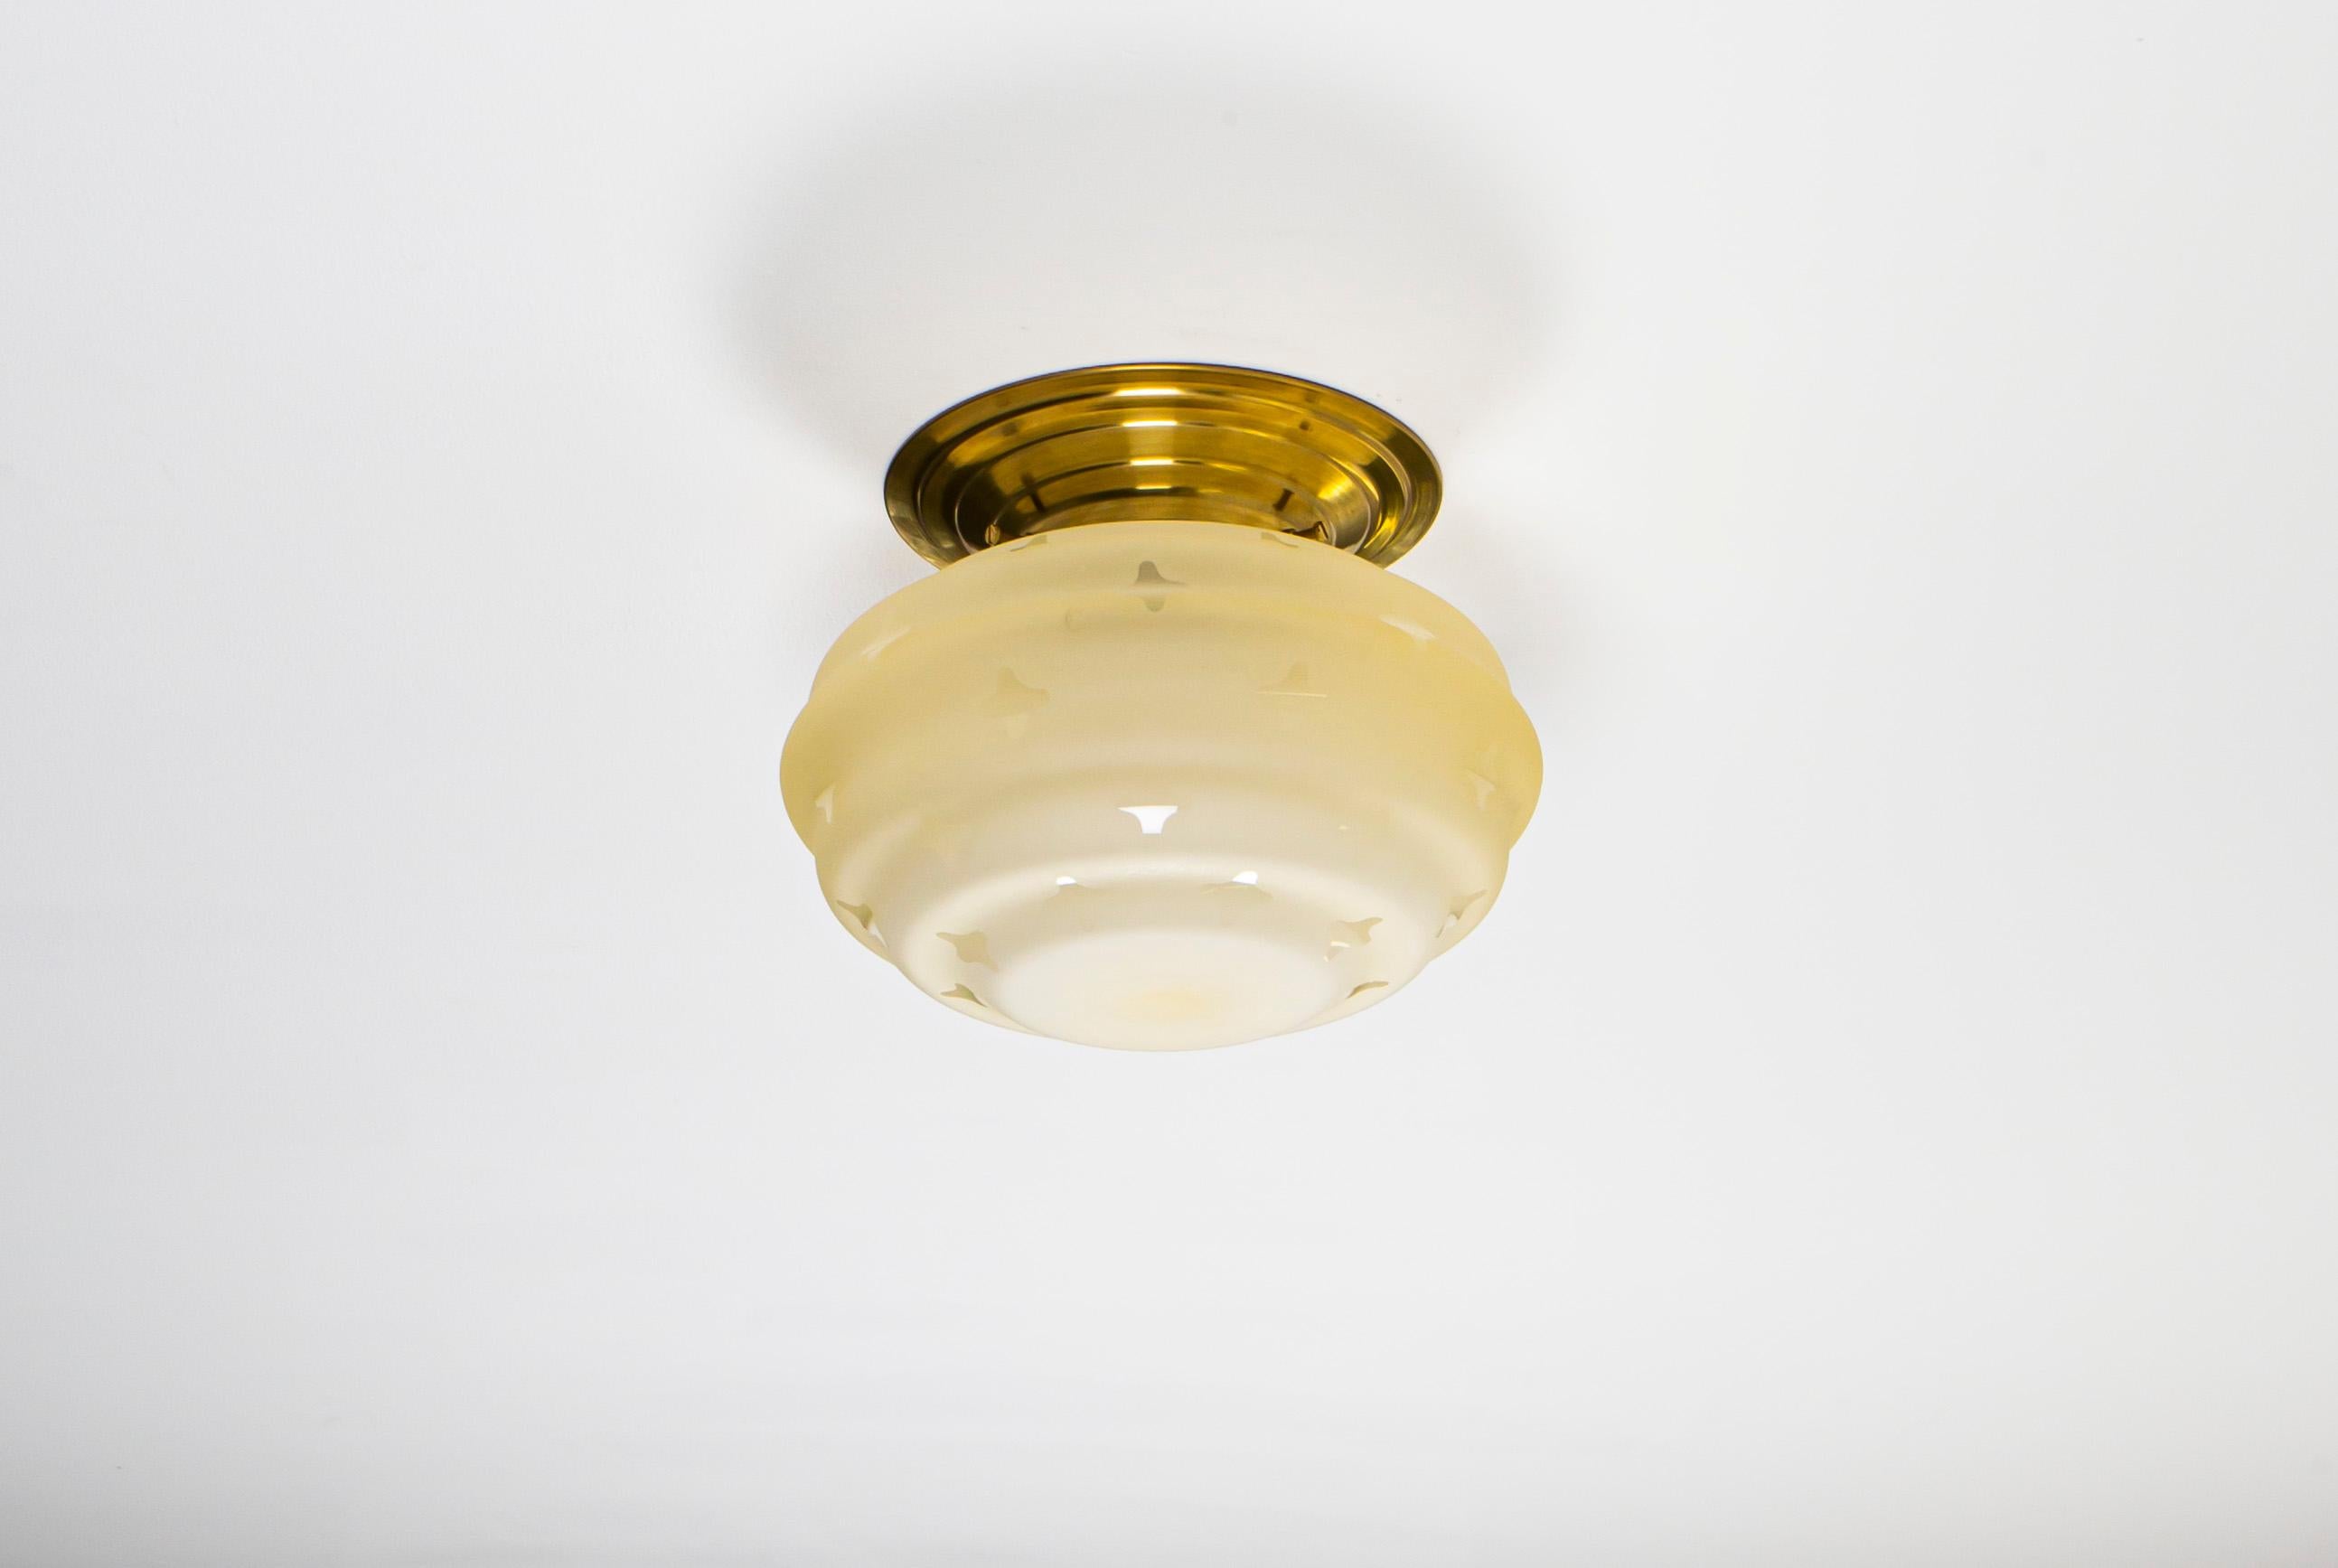 Decorative ceiling light with frosted glass shade and brass metal base. Designed and made in Norway from ca 1950s first half. The lamp is fully working and in very good vintage condition. It is fitted with one E27 bulb holder (works in the US) and